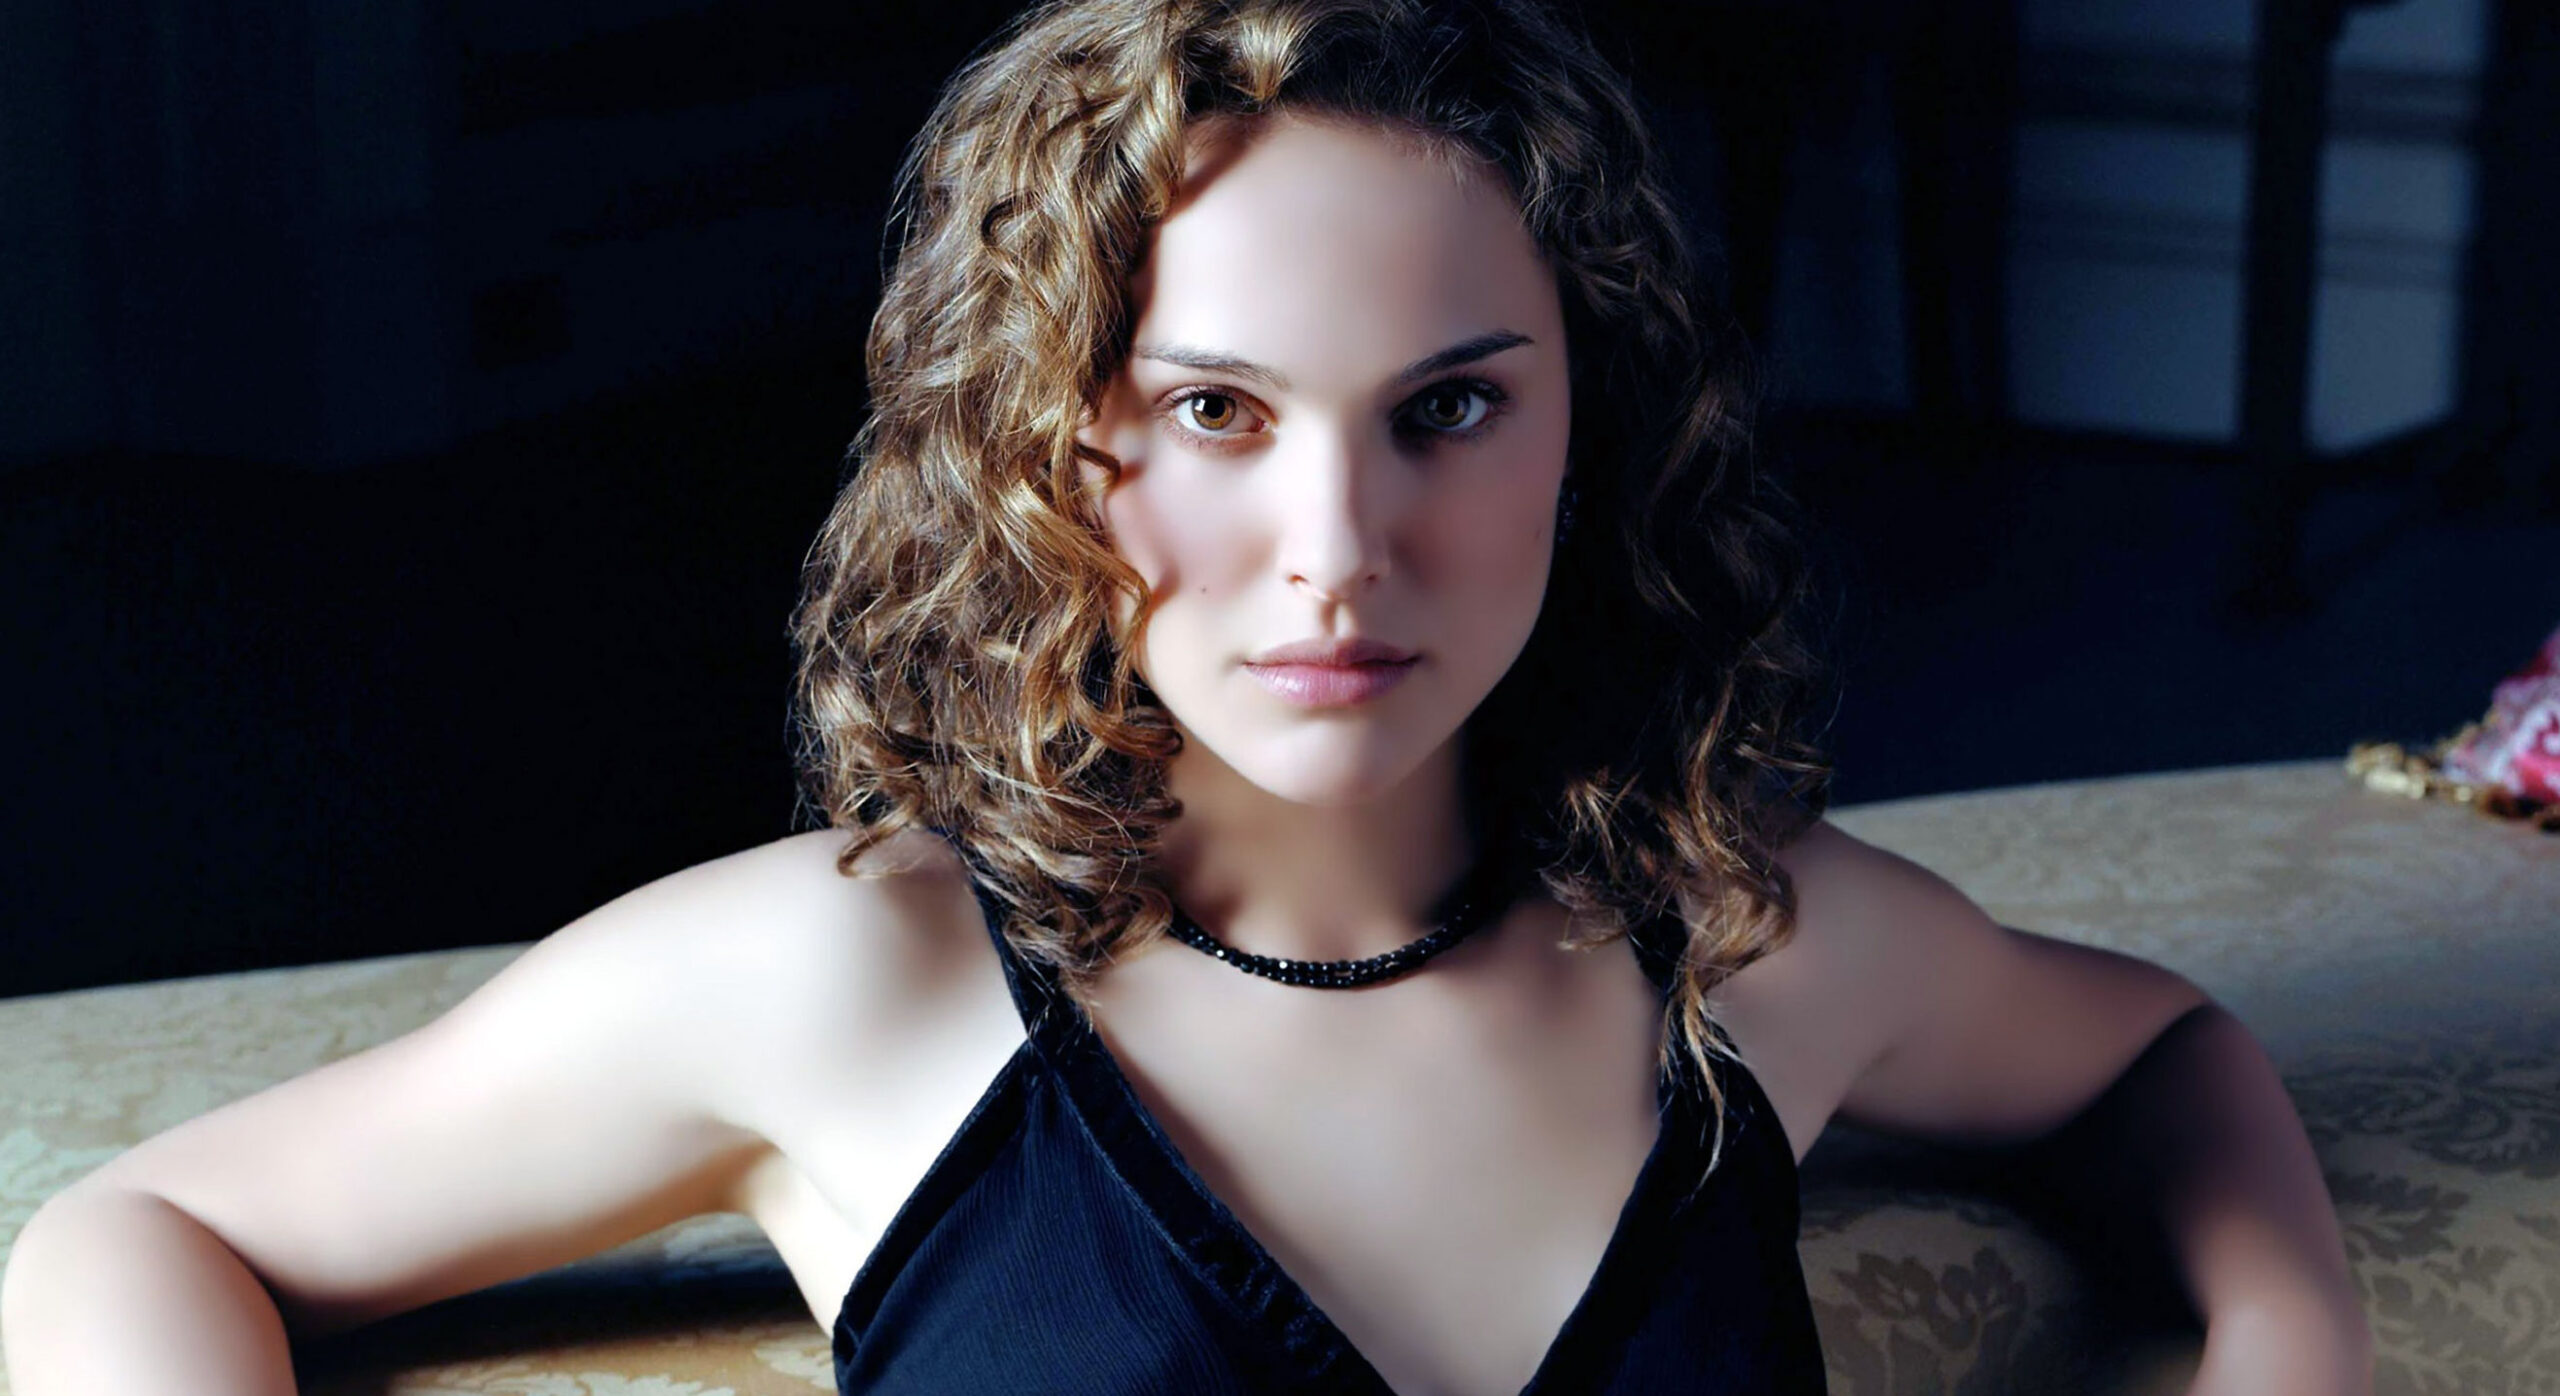 Hot Natalie Portman Naked And Sexy Photo Collection On Thothub